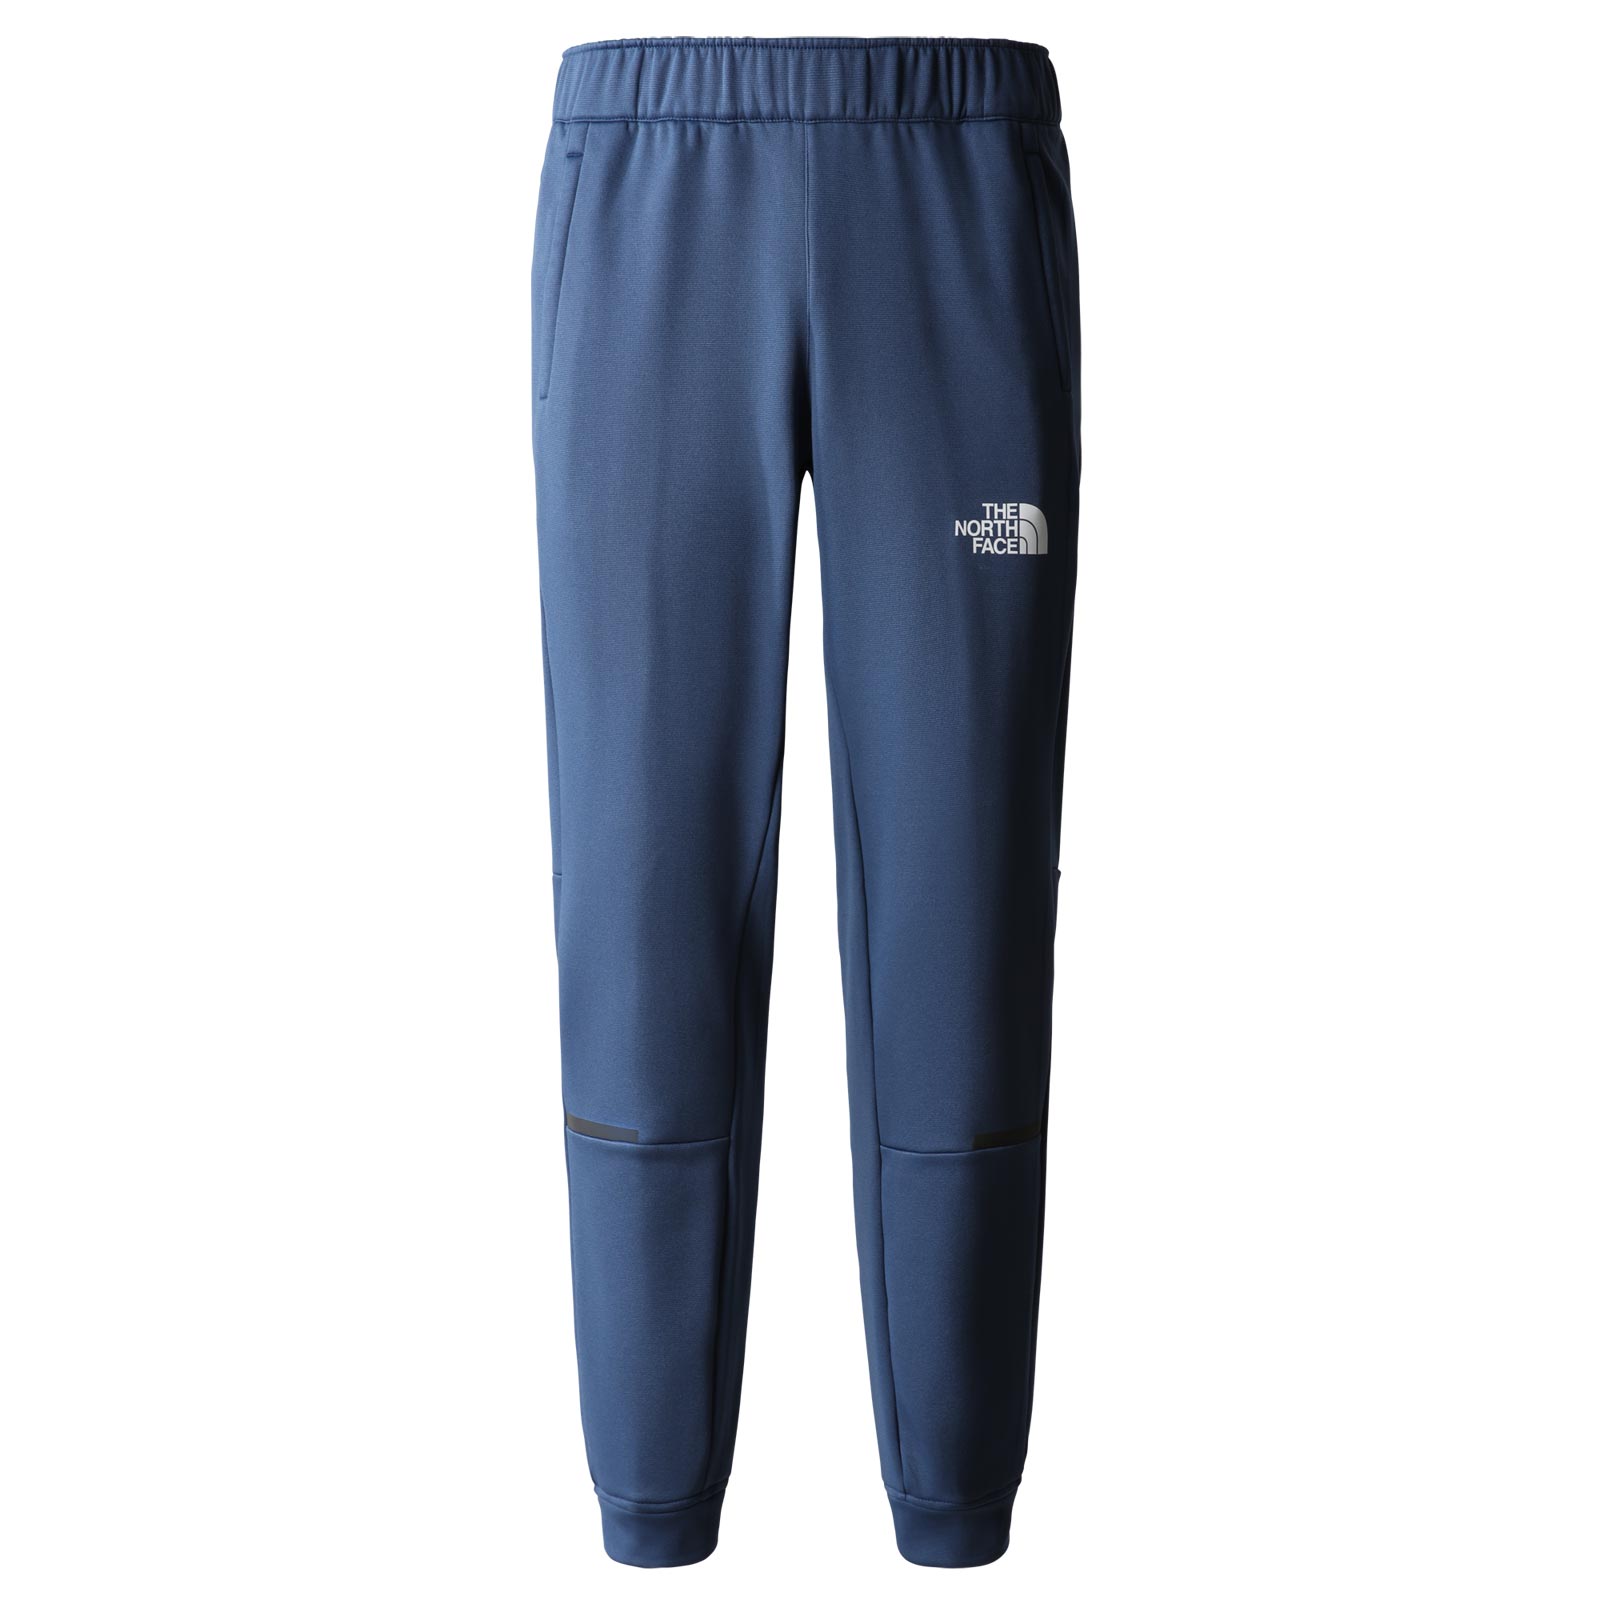 THE NORTH FACE MOUNTAIN ATHLETICS MENS FLEECE TROUSERS